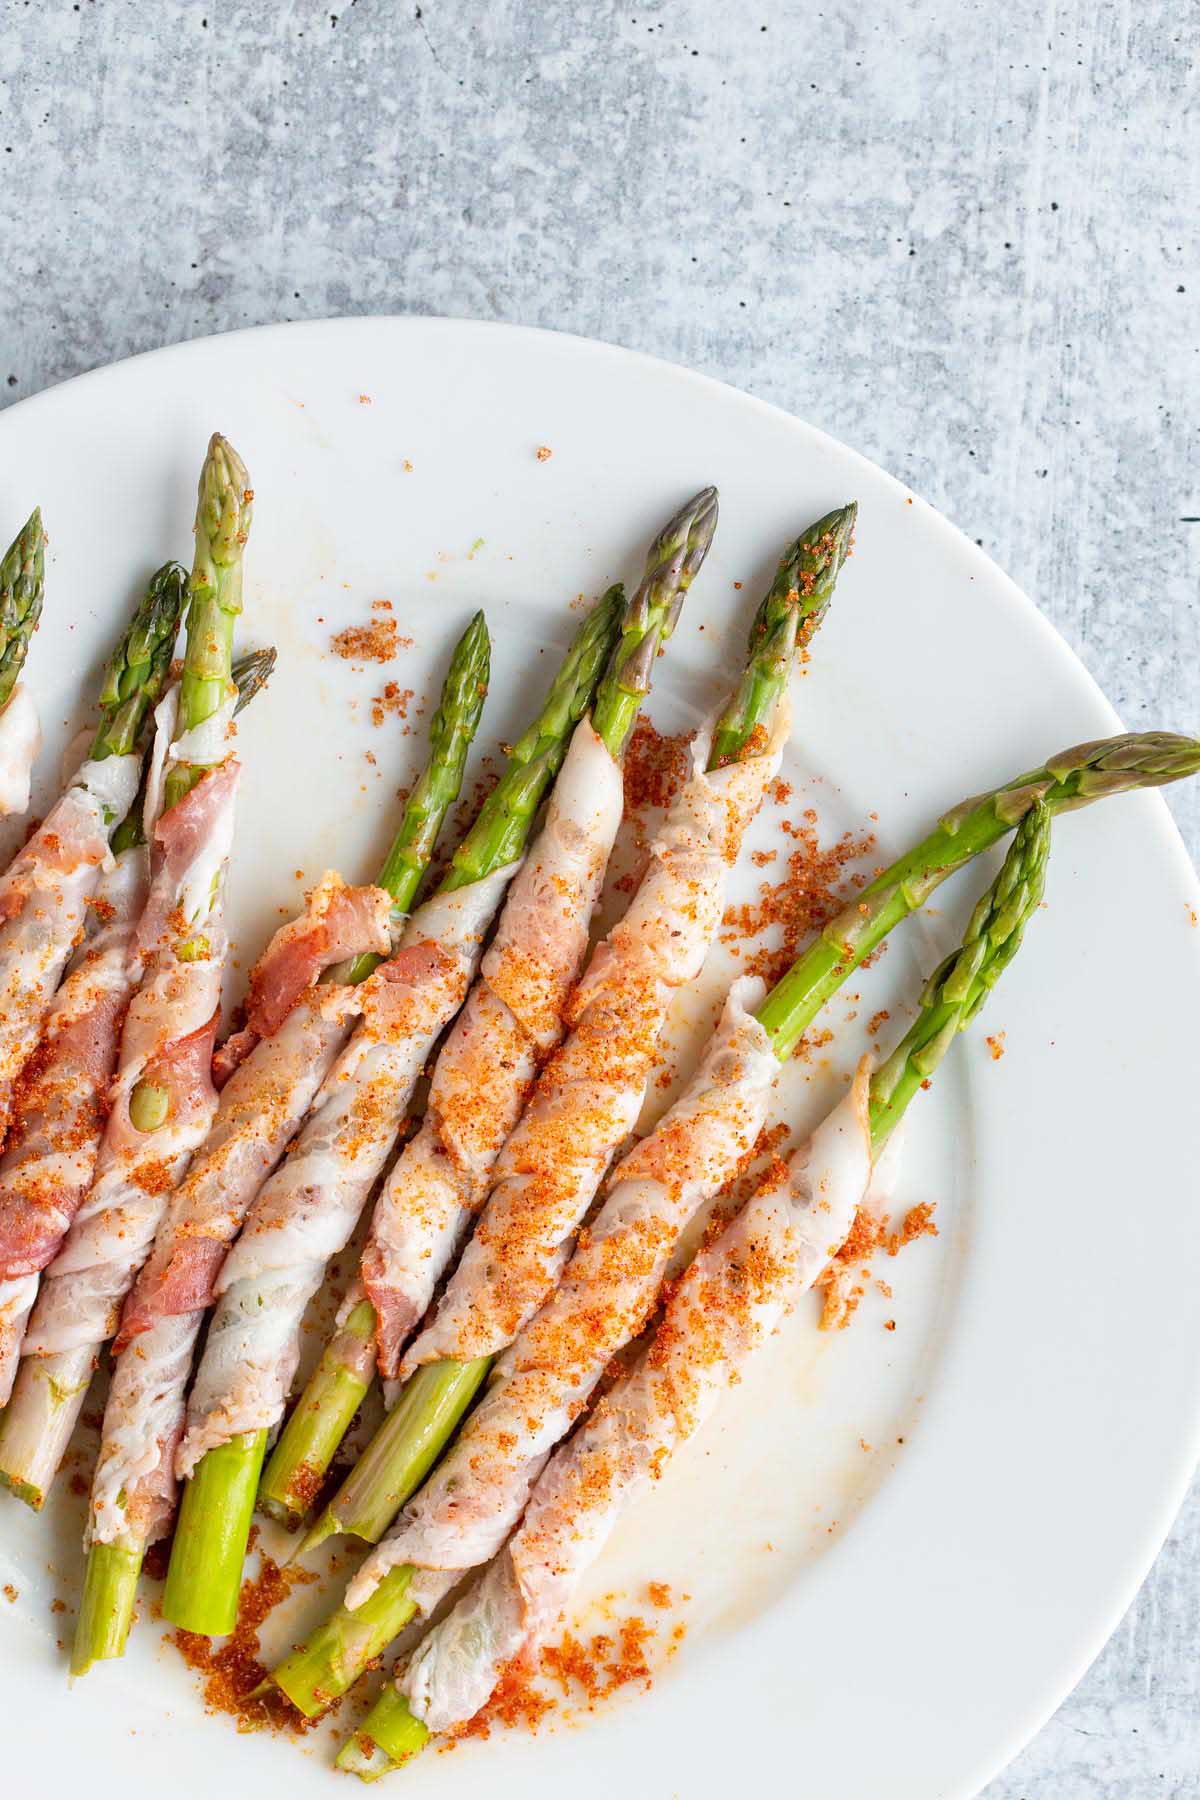 Uncooked bacon wrapped asparagus on a plate.